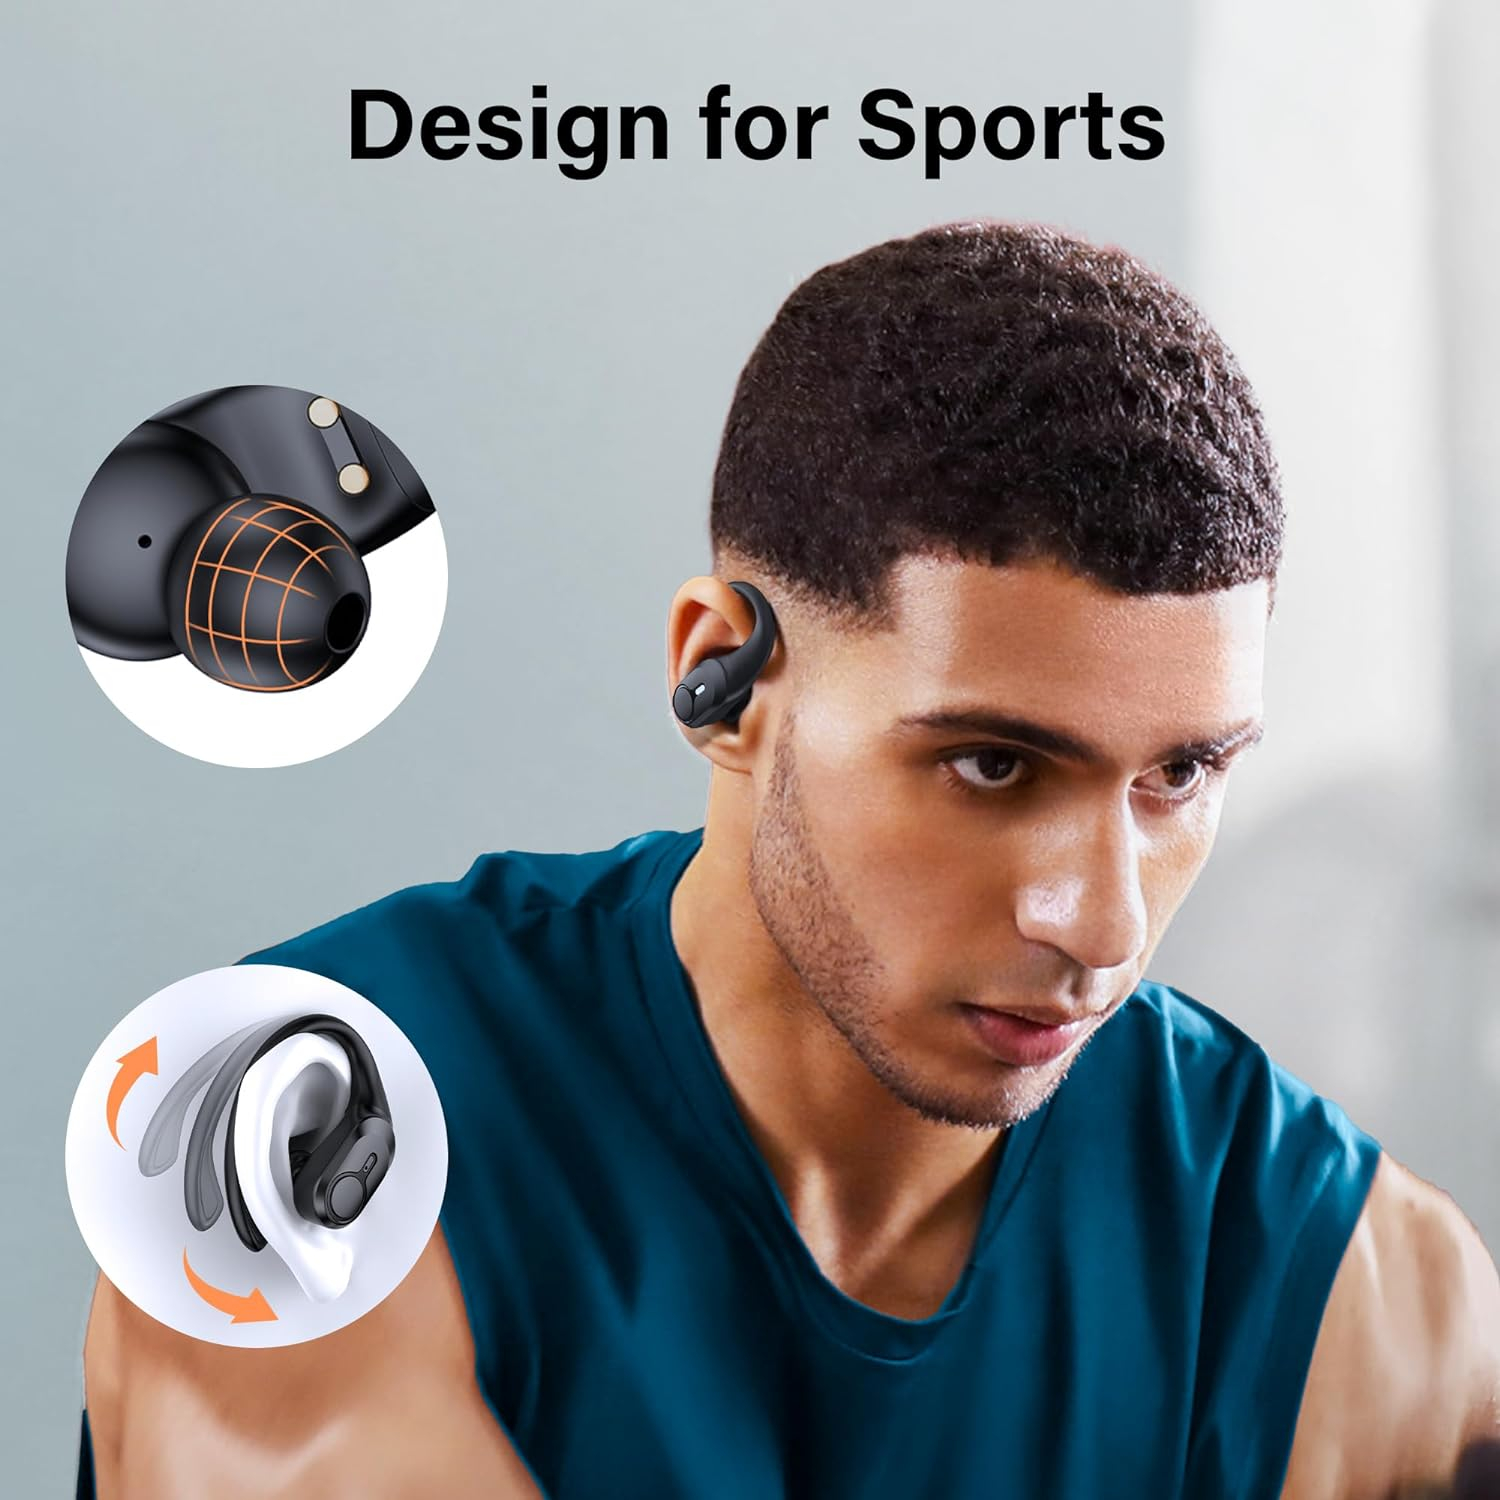 Wireless Earbuds Bluetooth Headphones 70hrs Playback Ear Buds IPX7 Waterproof Wireless Charging Case  Dual Power Display Over-Ear Stereo Bass Earphones with Earhooks for Sports/Workout/Running